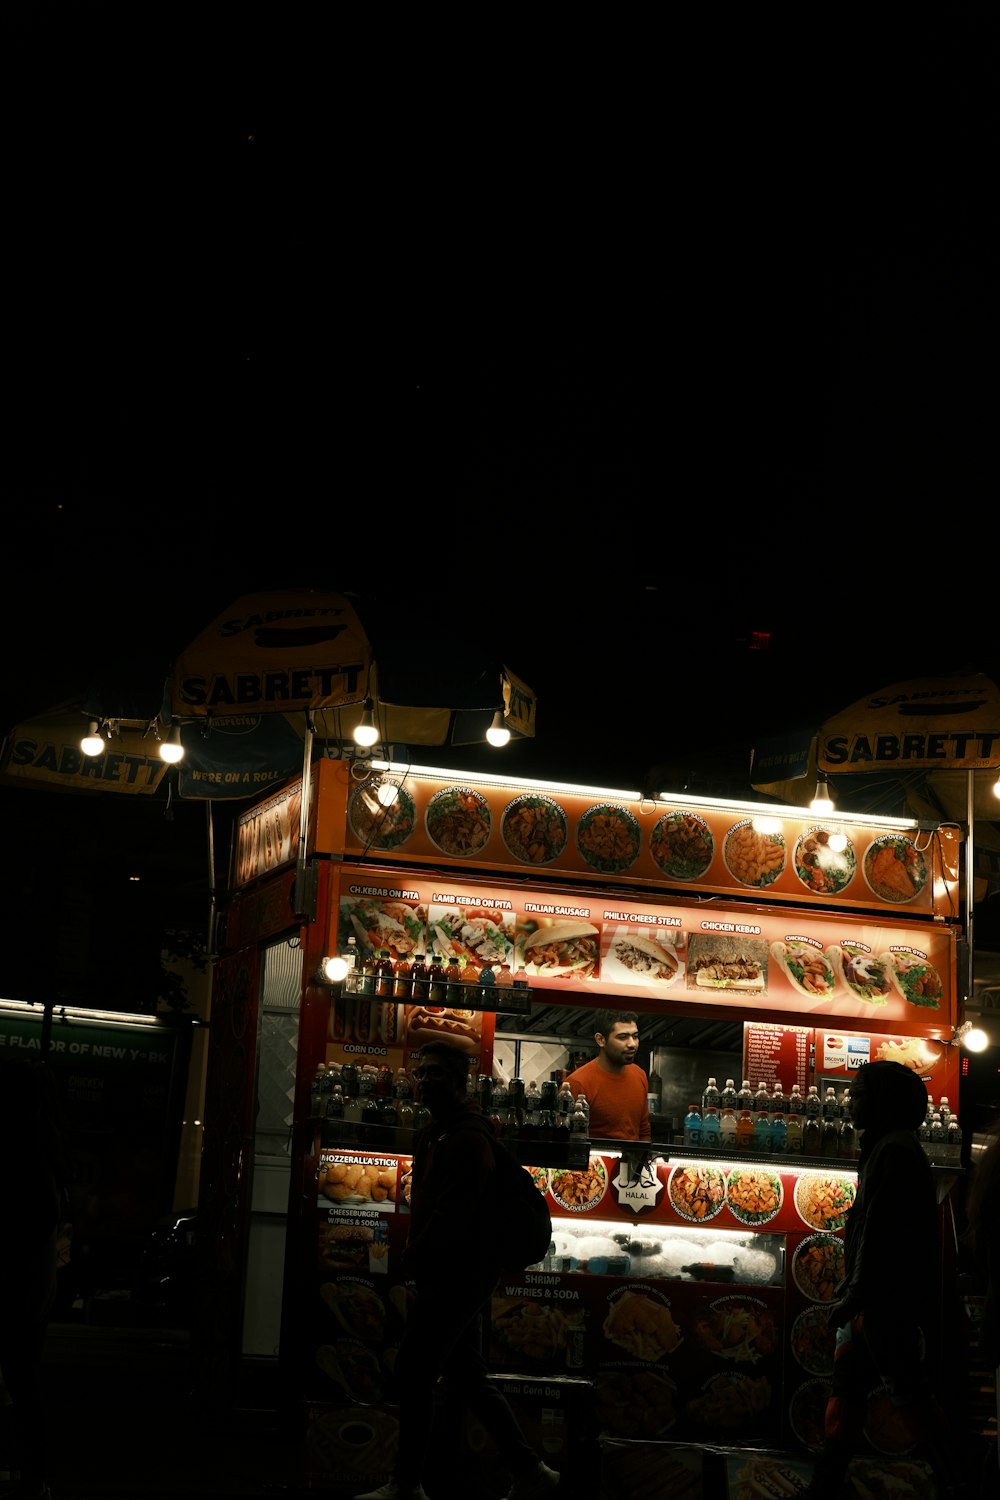 a food stand lit up at night in the dark